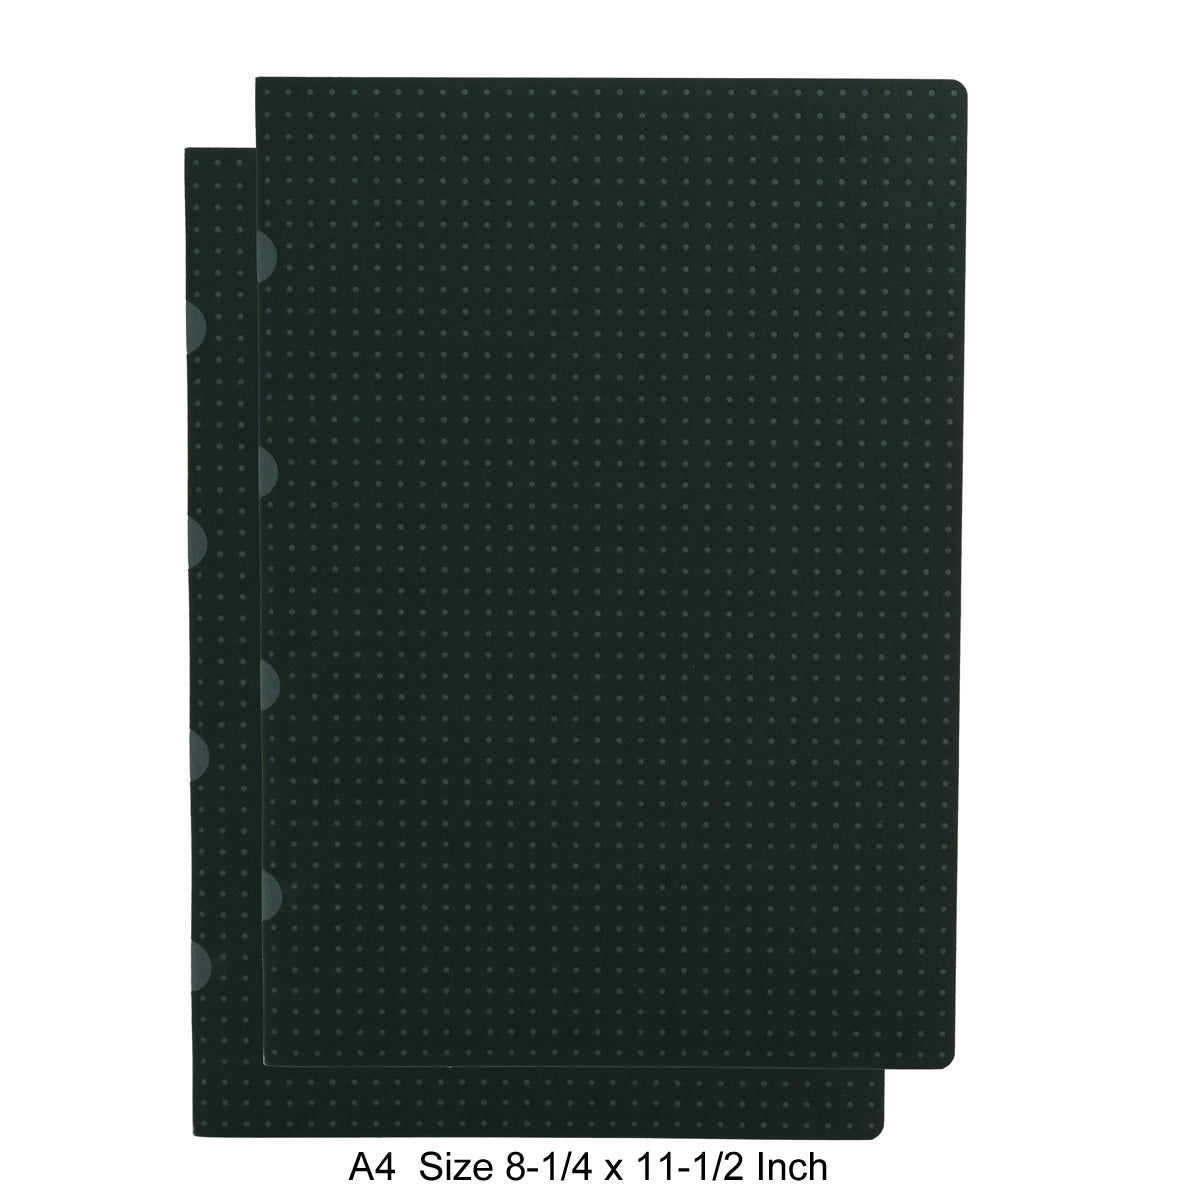 Paper-Oh Circulo Cahier Notebook A4 Size Set of 2